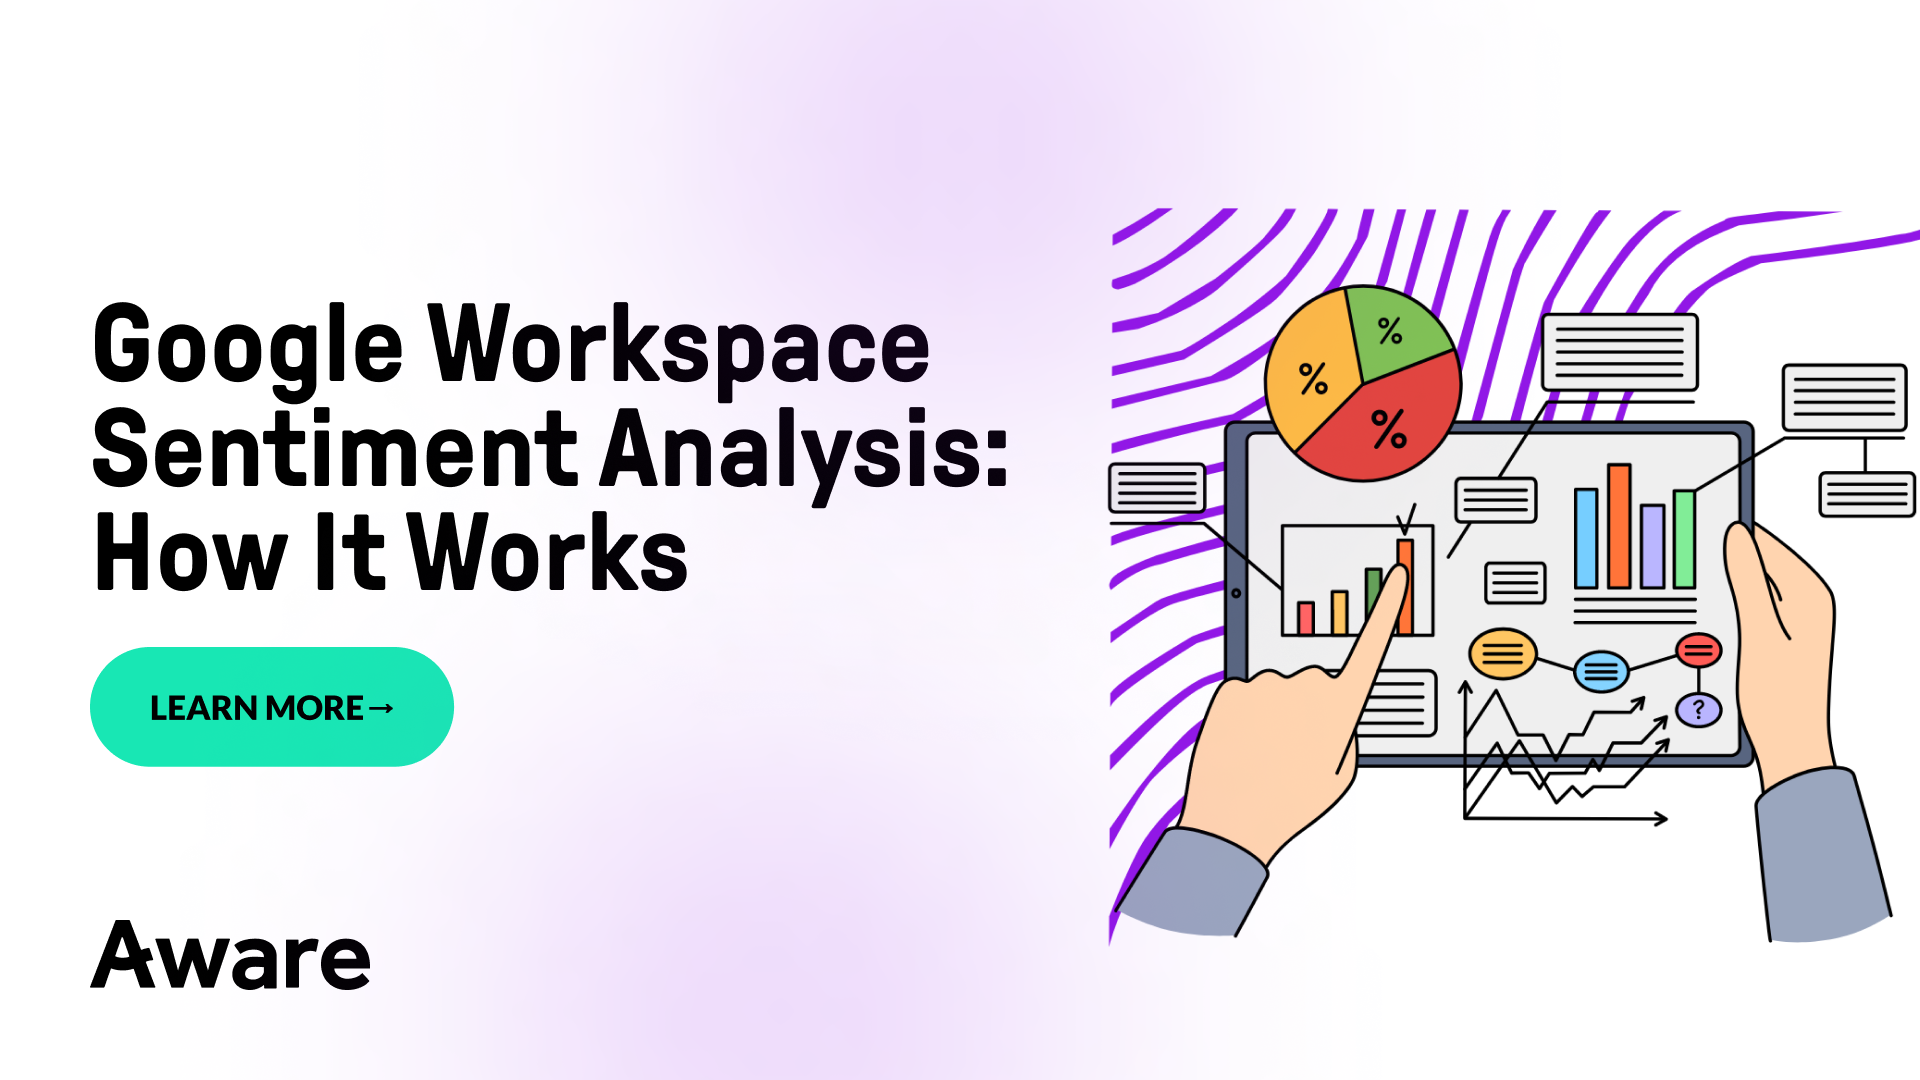 Google Workspace Sentiment Analysis: How It Works